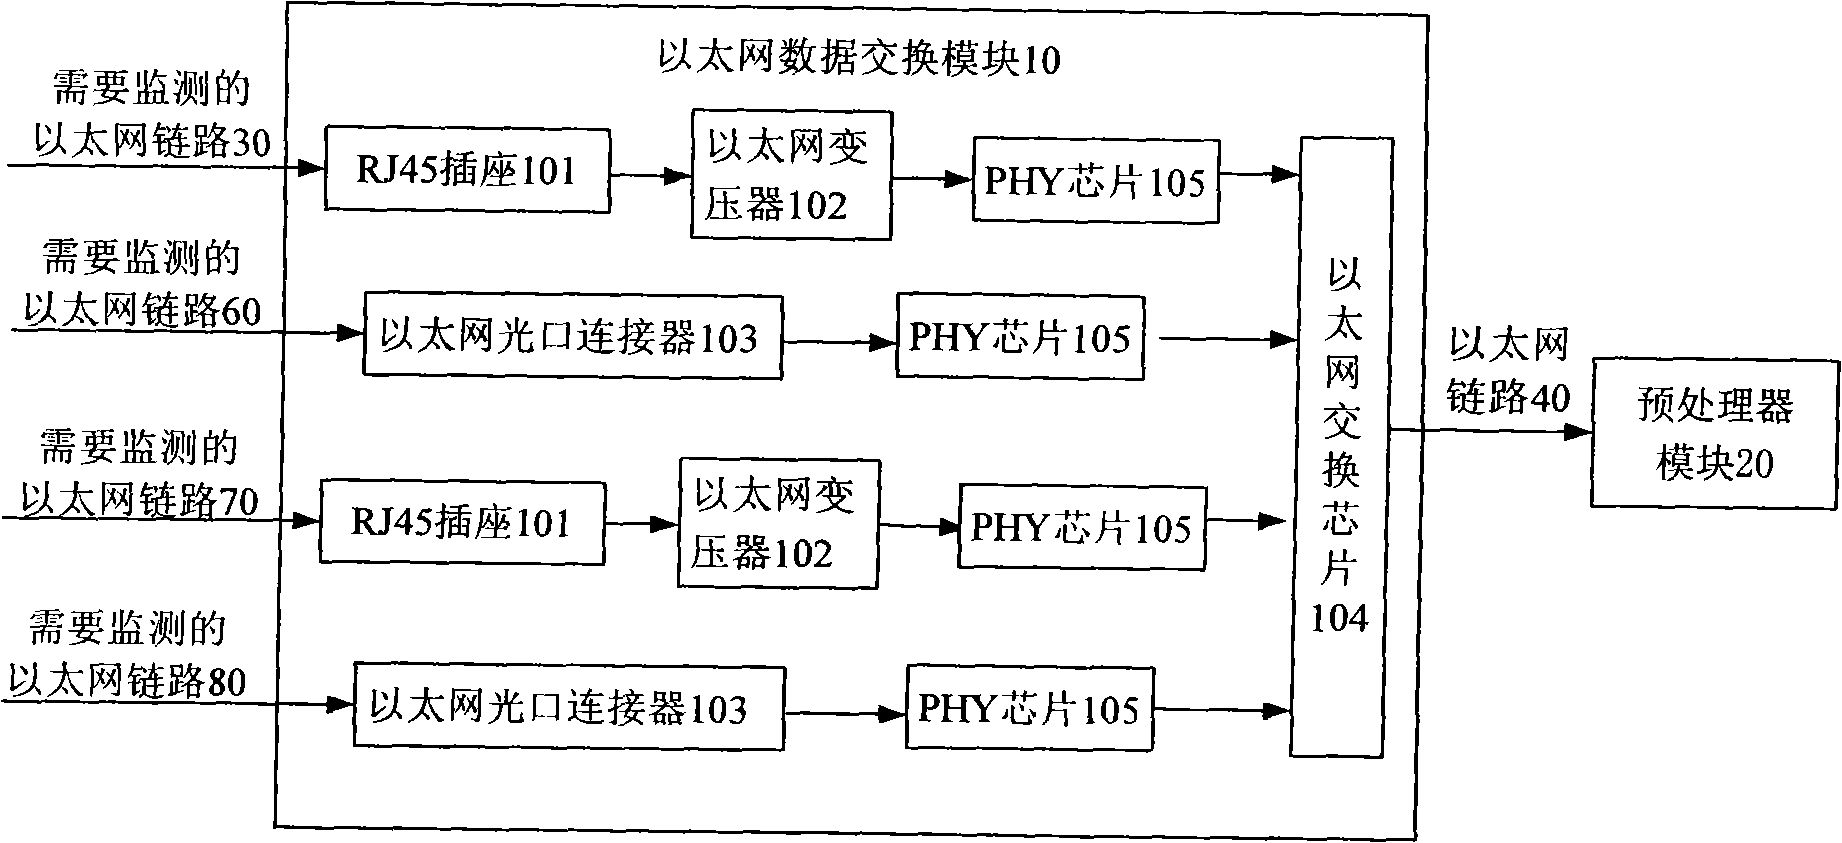 Ethernet data acquisition network card and Ethernet data acquisition method